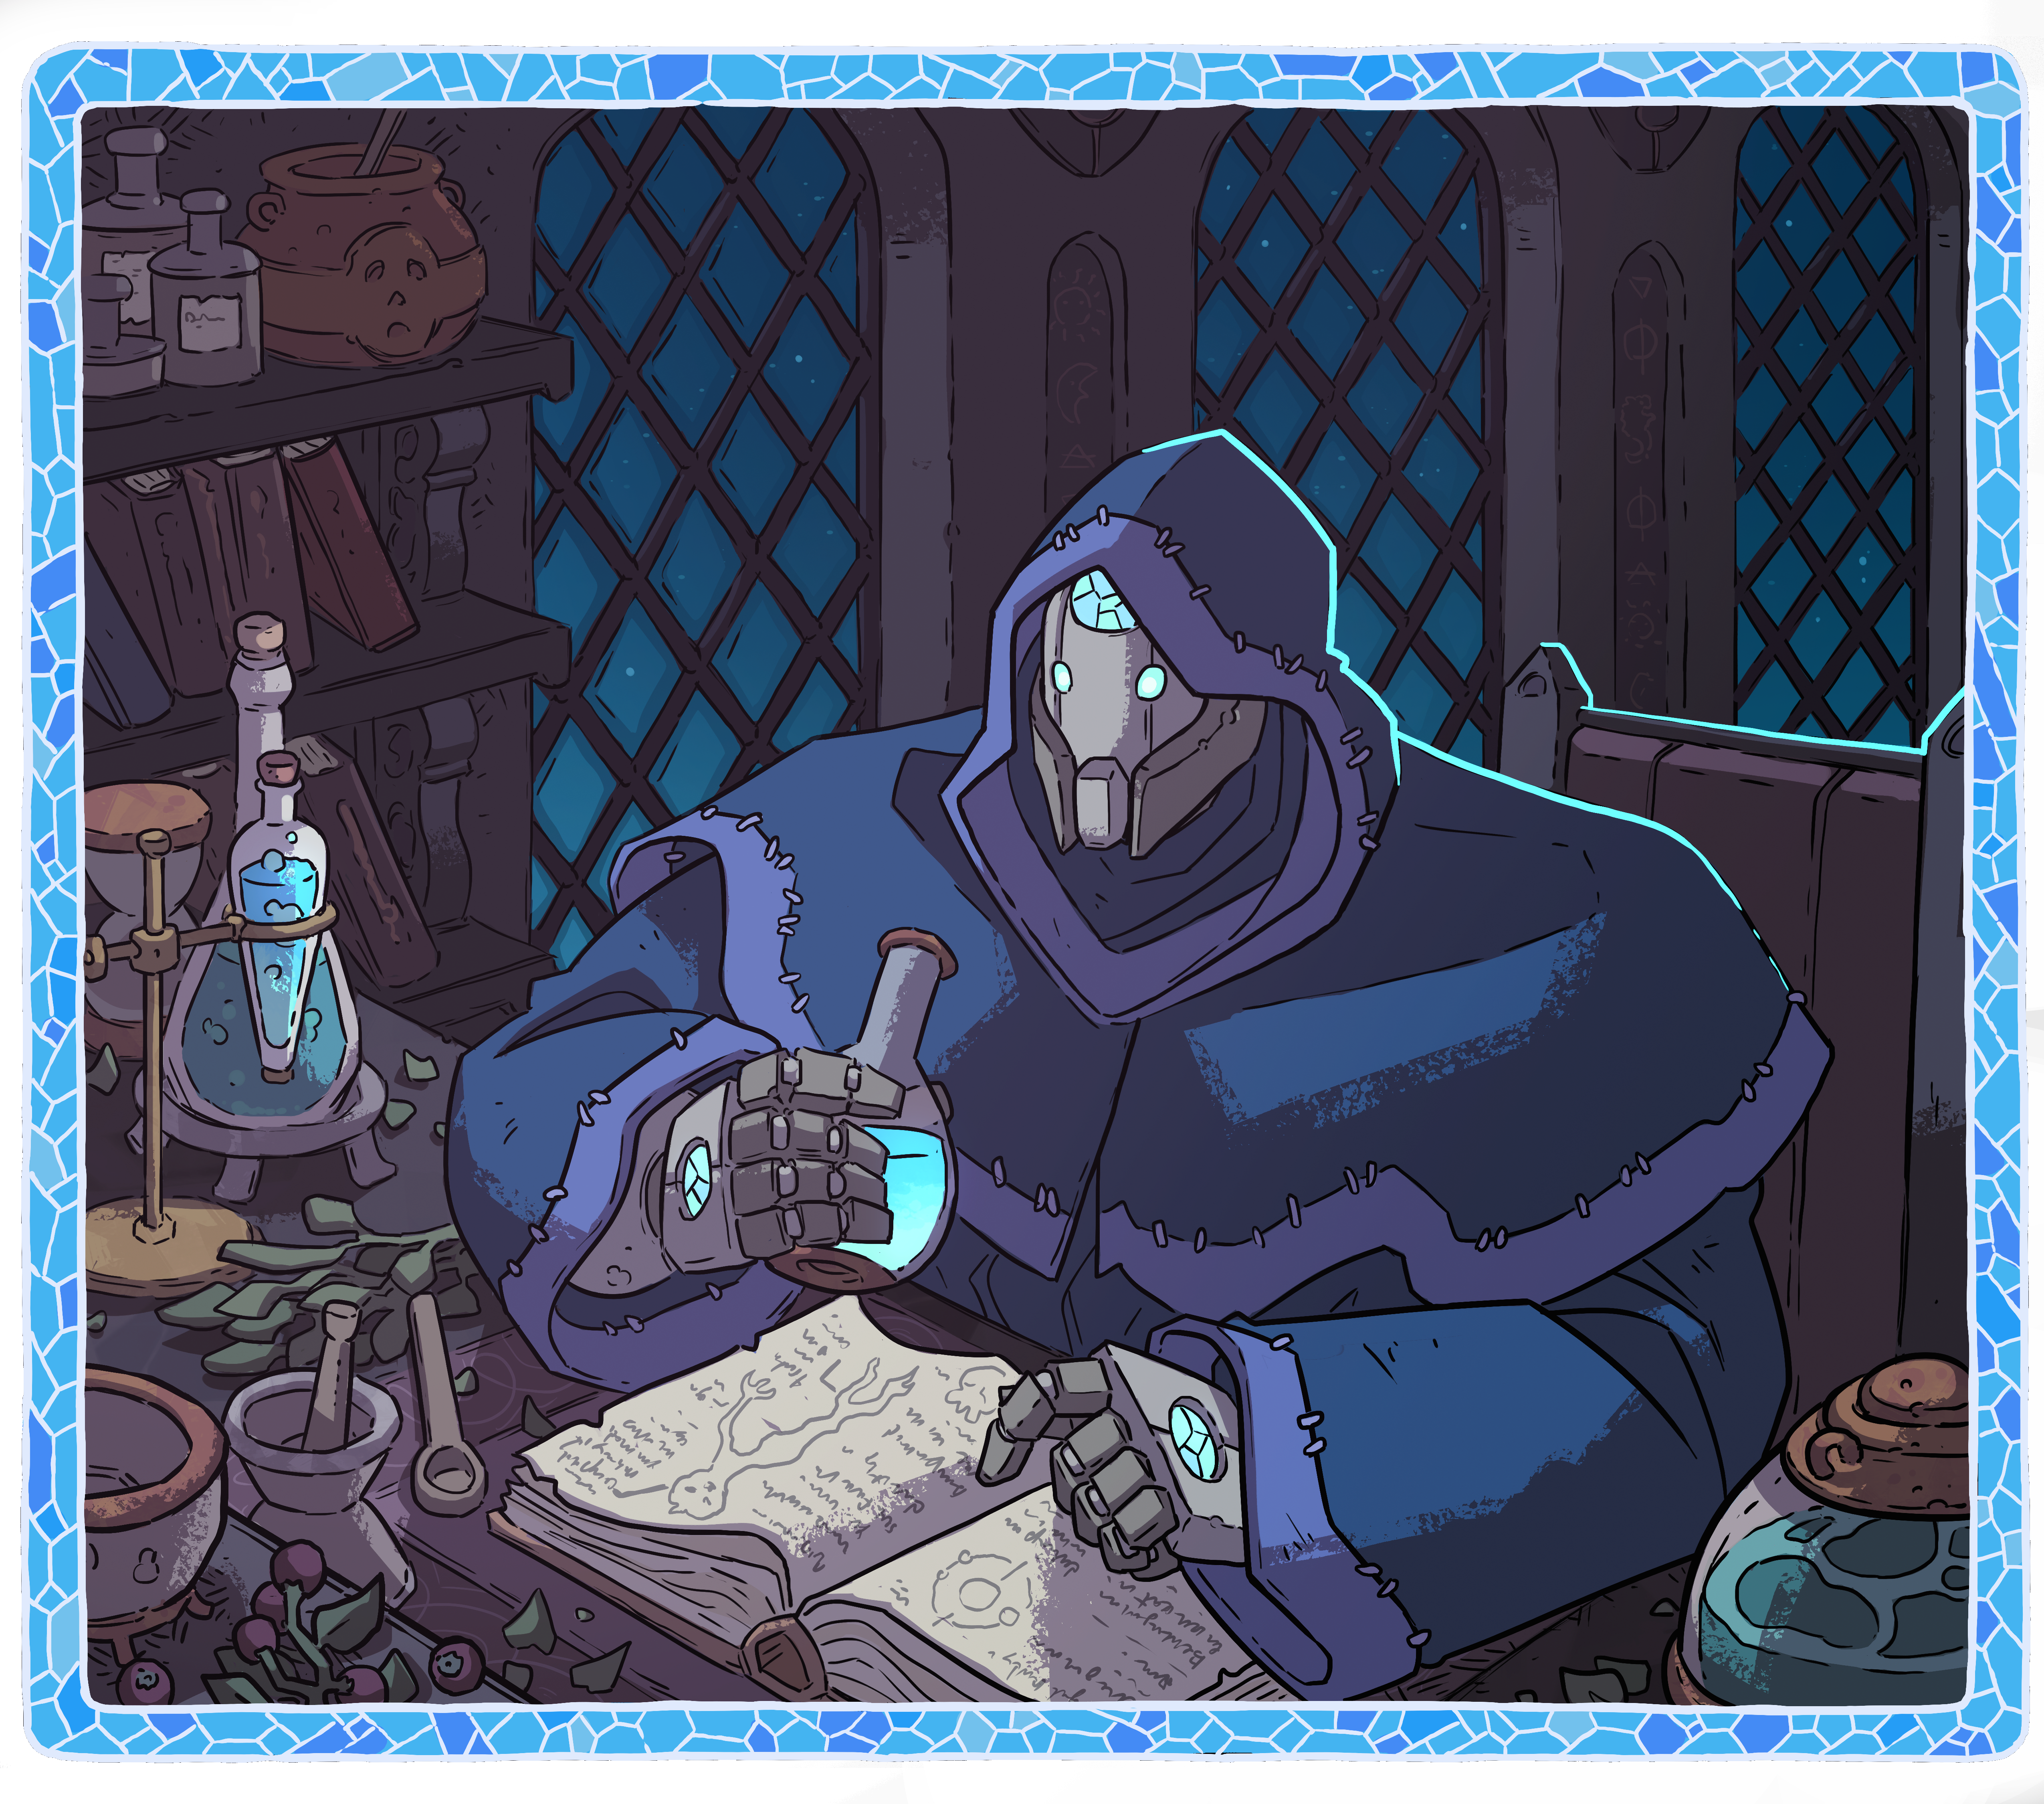 Cadfael, a golem in a monk cowl, hunched over a desk examining a the contents of a vial and consulting a book